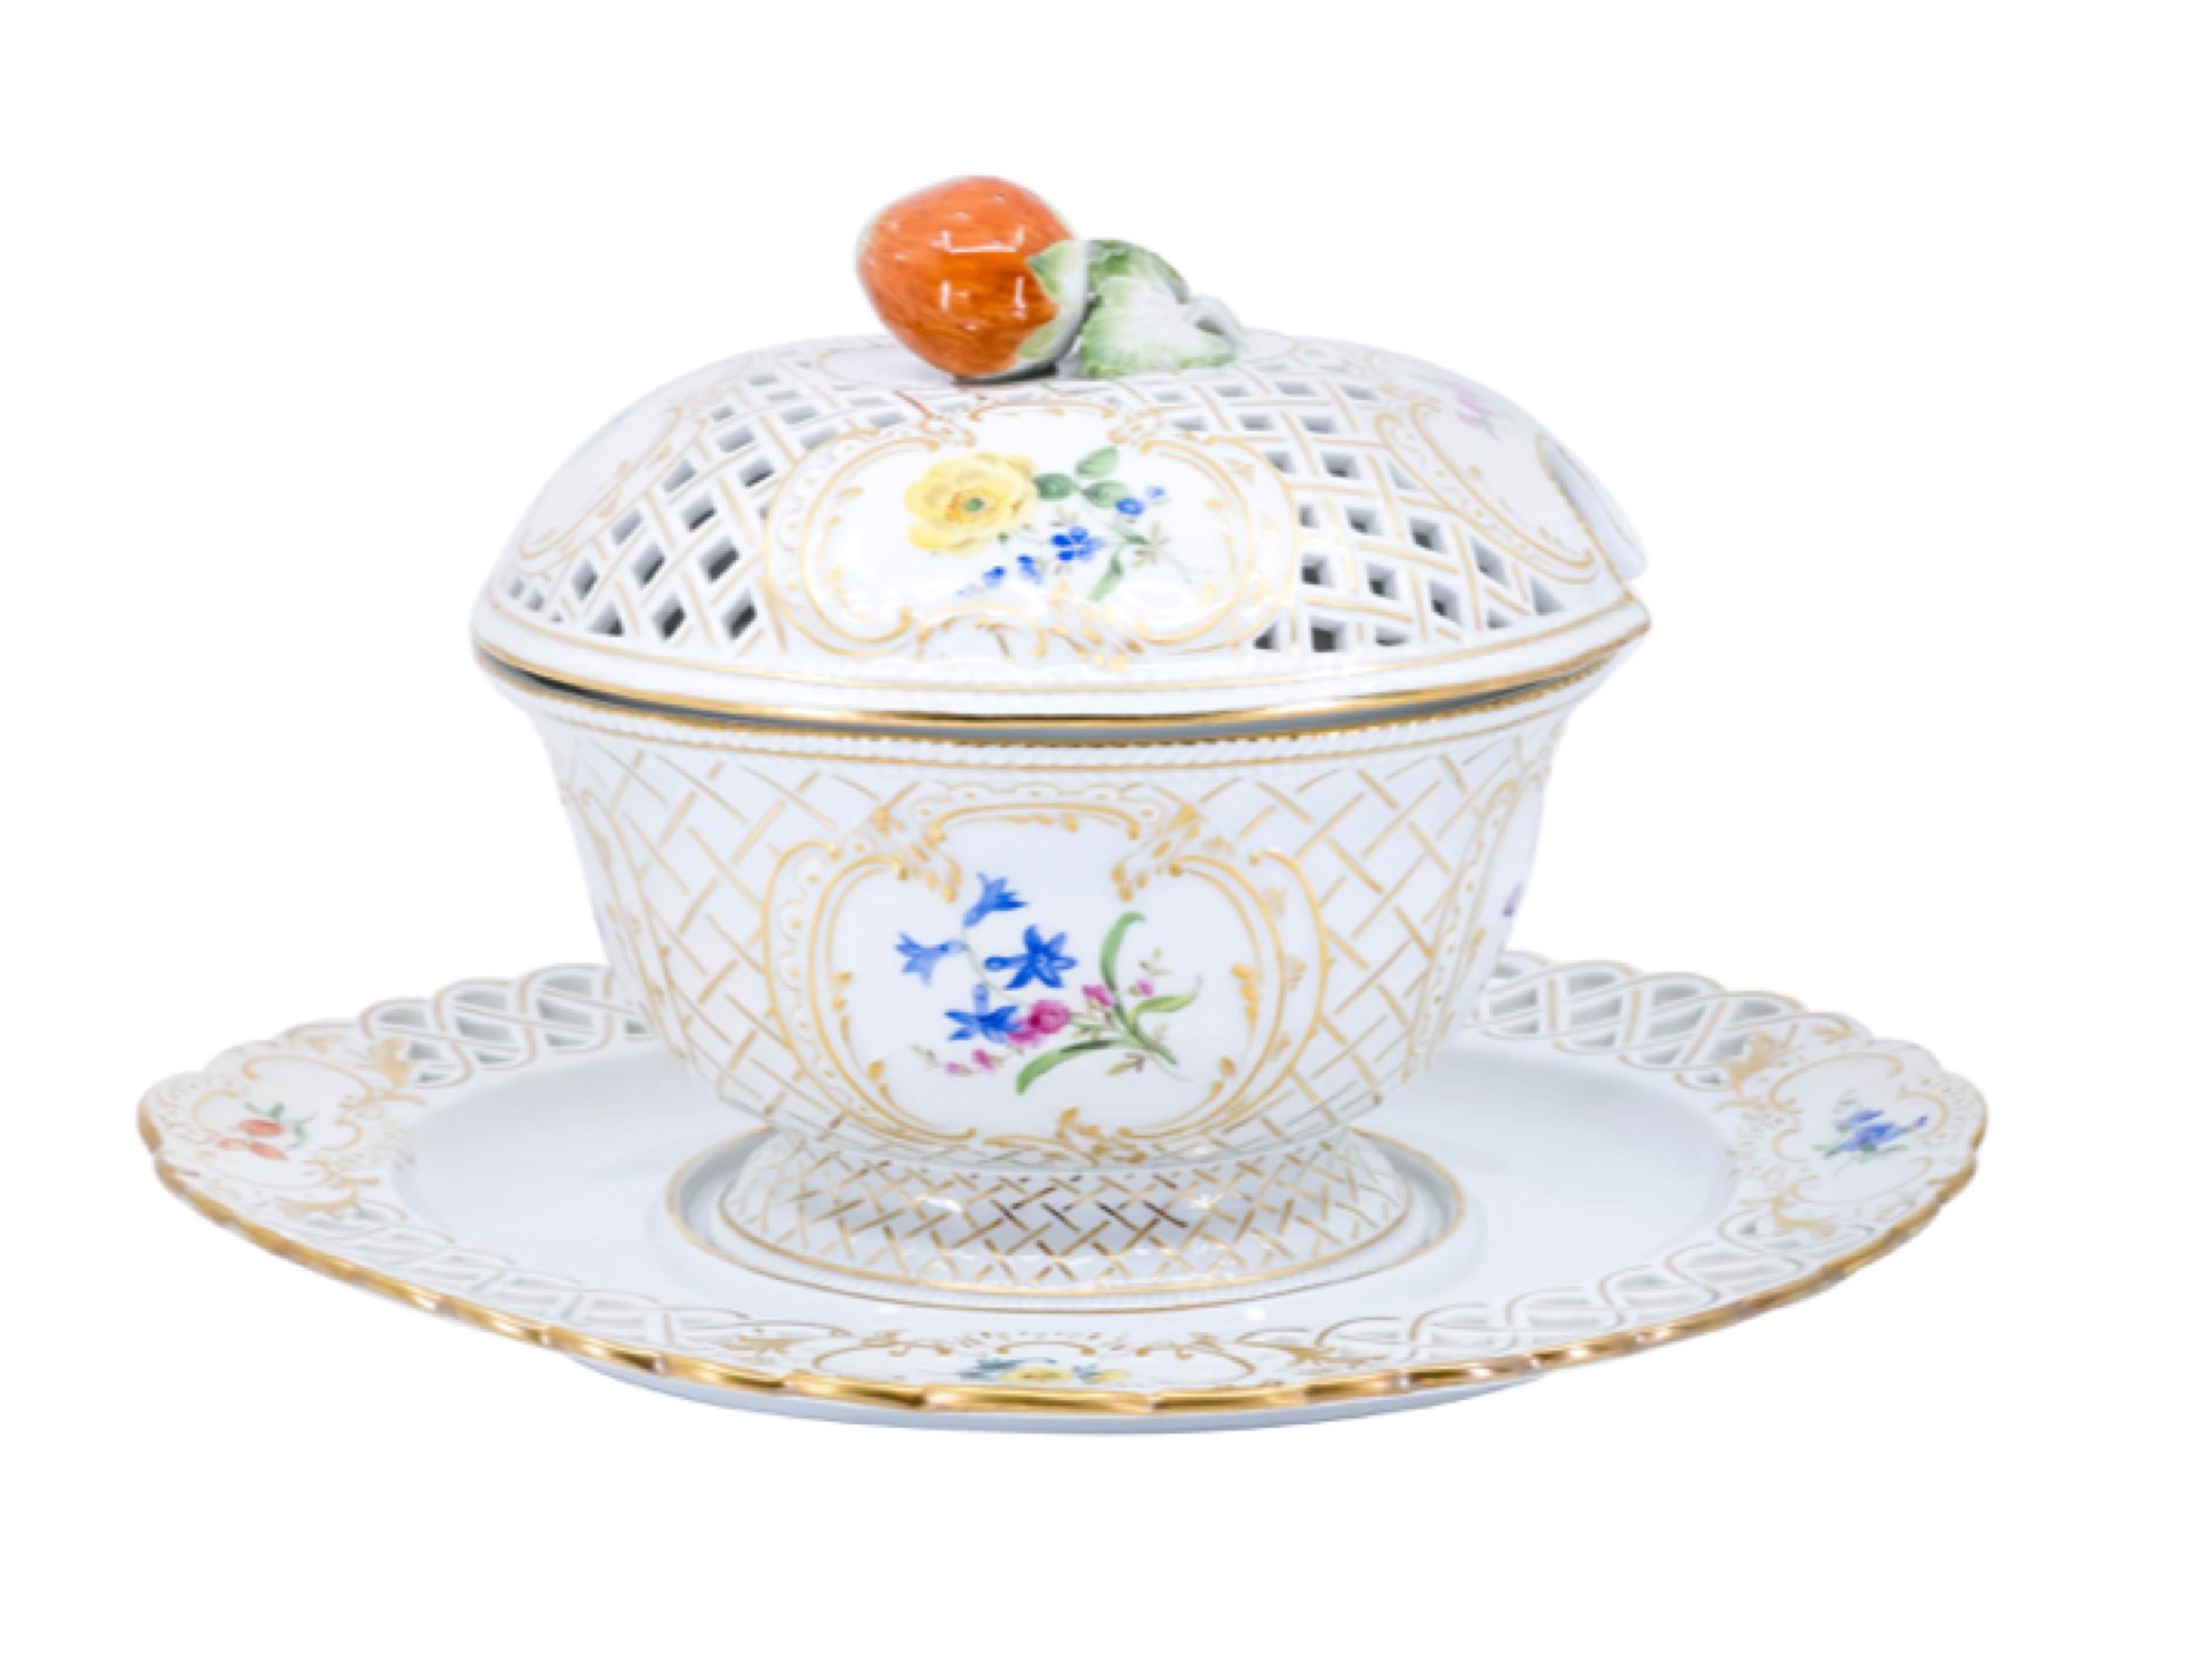 19th Century Meissen Porcelain Covered Bowl with Strawberry Finial For Sale 5